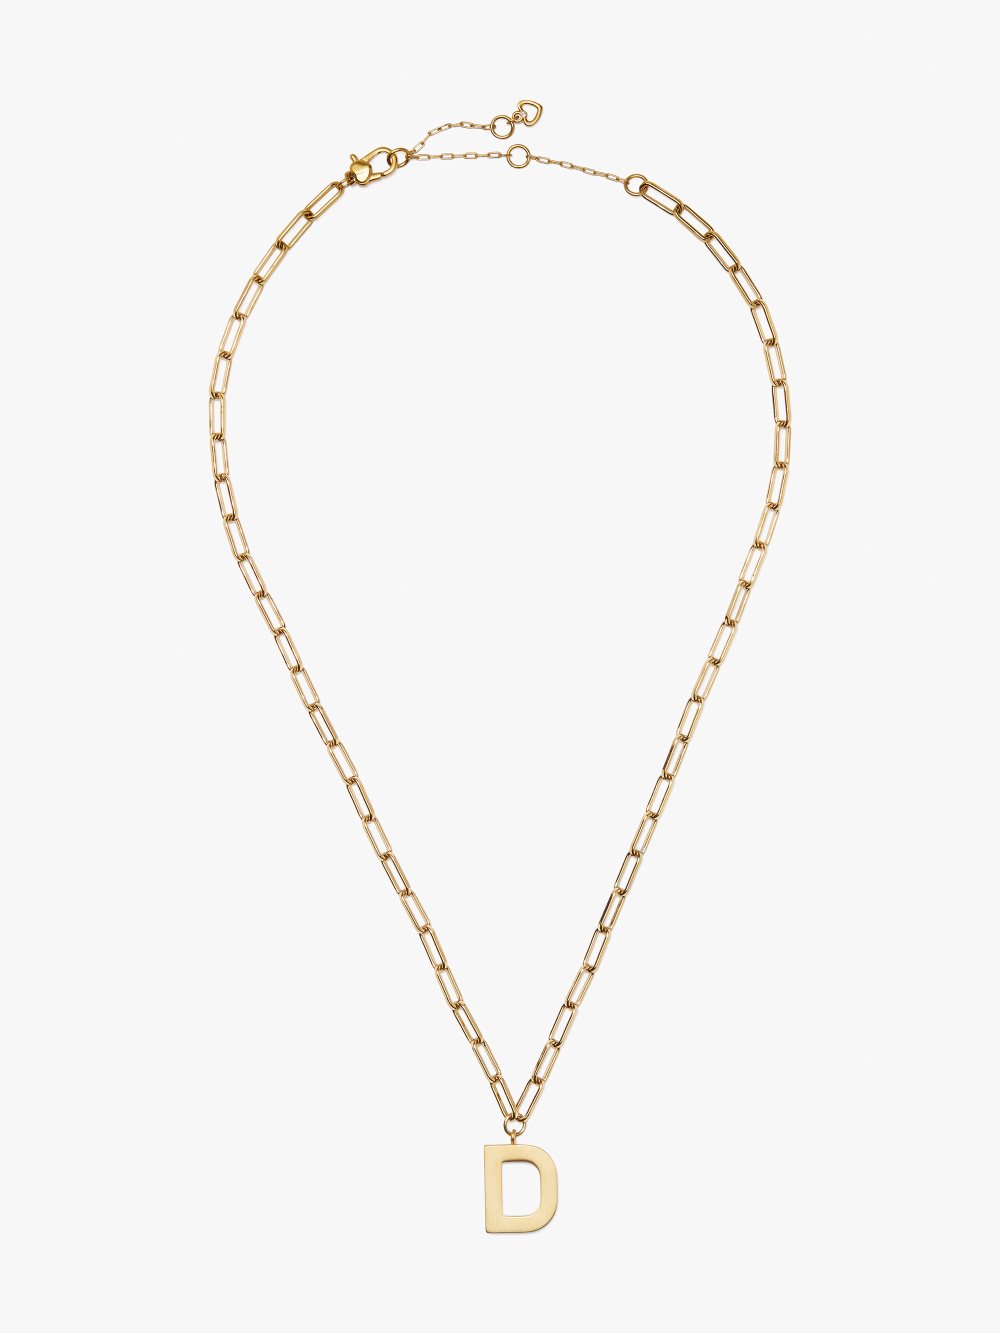 Women's gold. d initial this pendant | Kate Spade